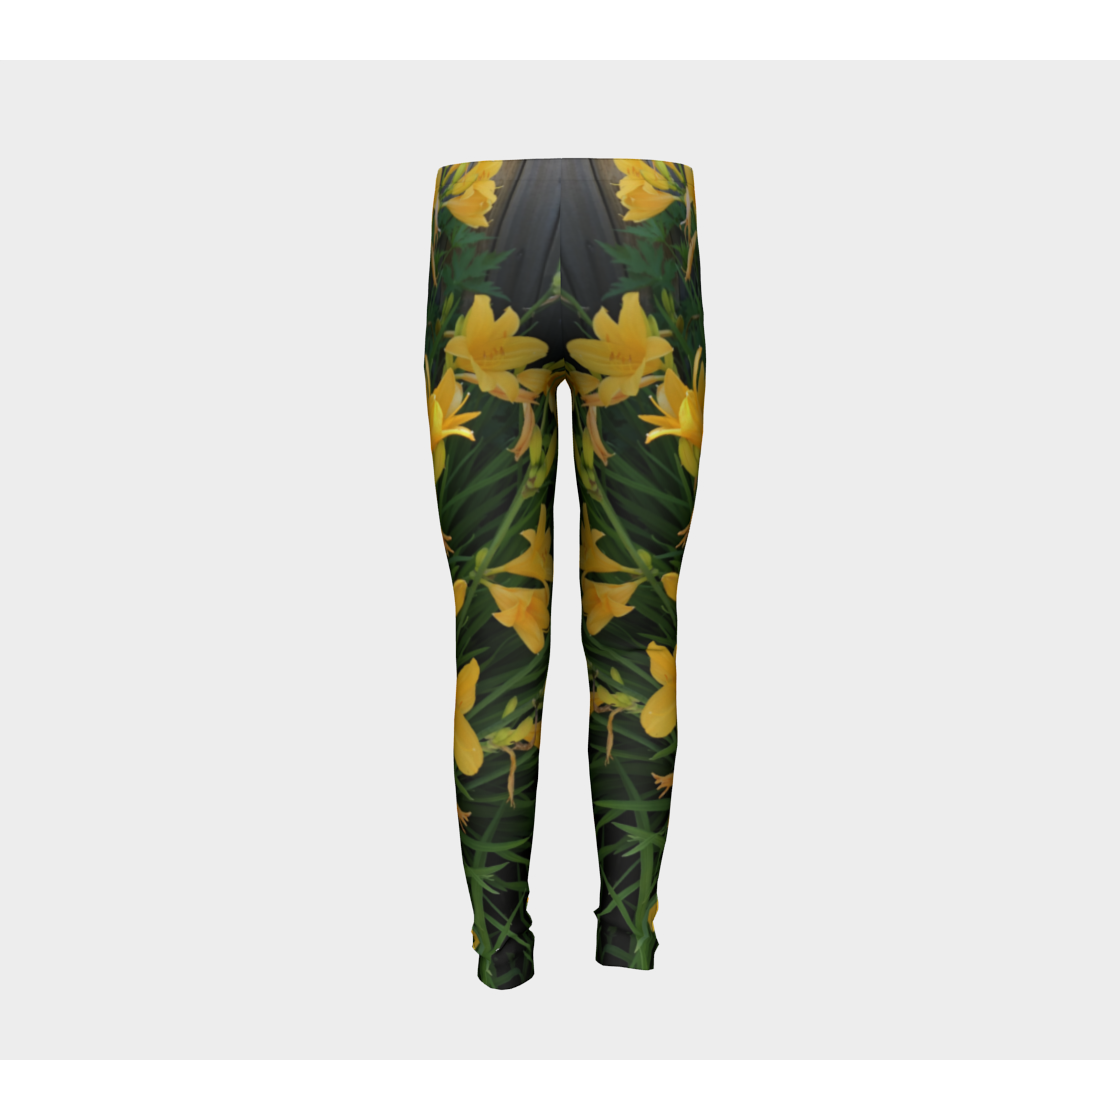 Youth Leggings for girls with: Yellow Lily Design, 8-9 years, Back